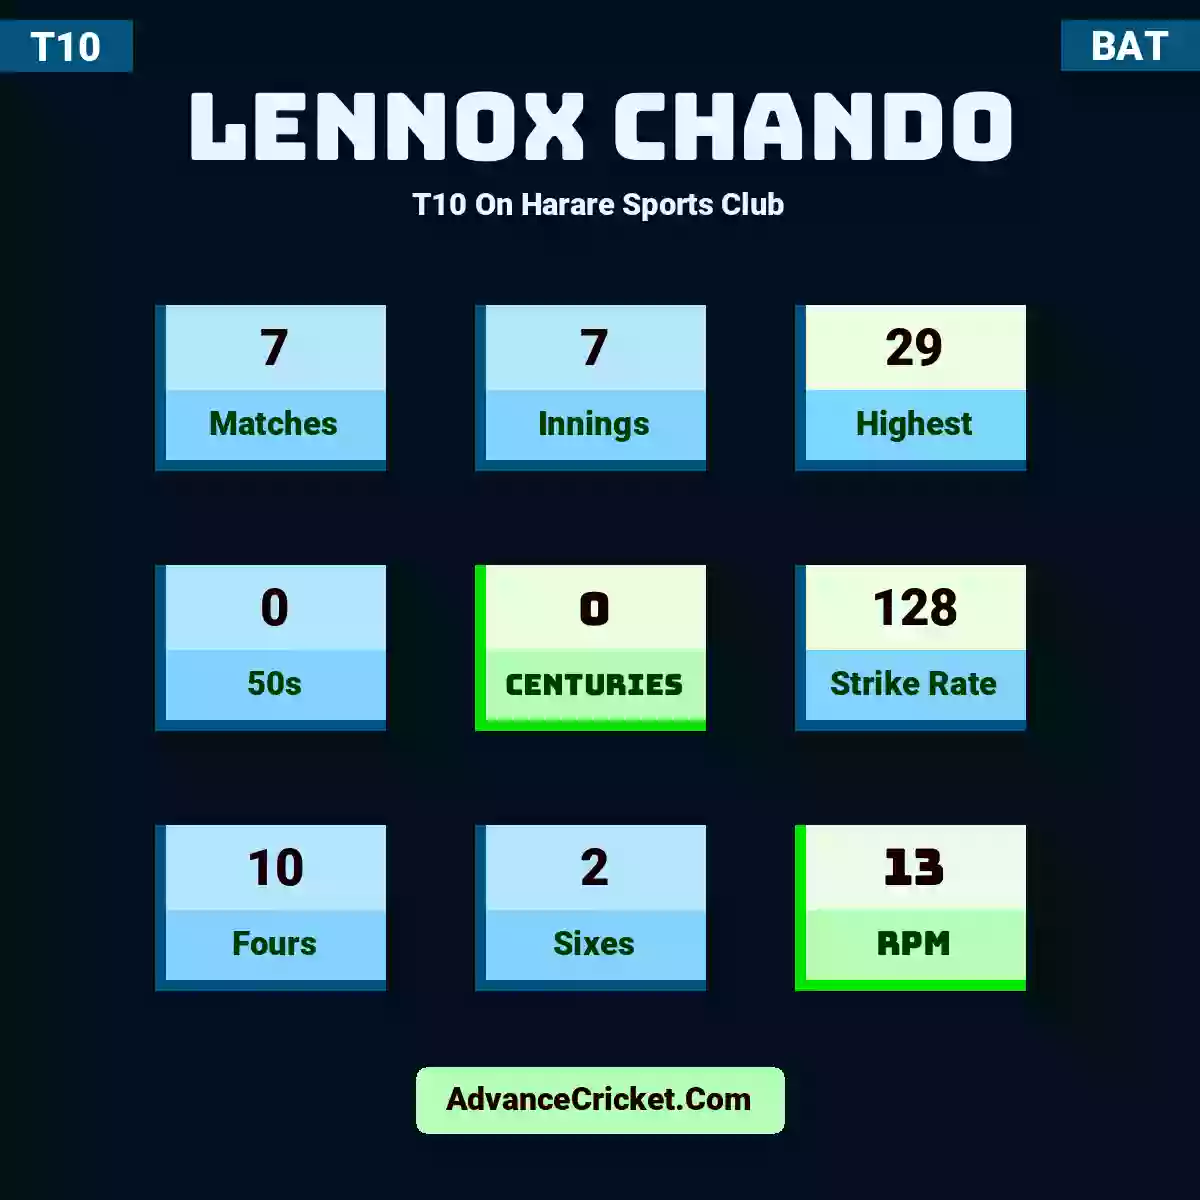 lennox Chando T10  On Harare Sports Club, lennox Chando played 7 matches, scored 29 runs as highest, 0 half-centuries, and 0 centuries, with a strike rate of 128. L.Chando hit 10 fours and 2 sixes, with an RPM of 13.